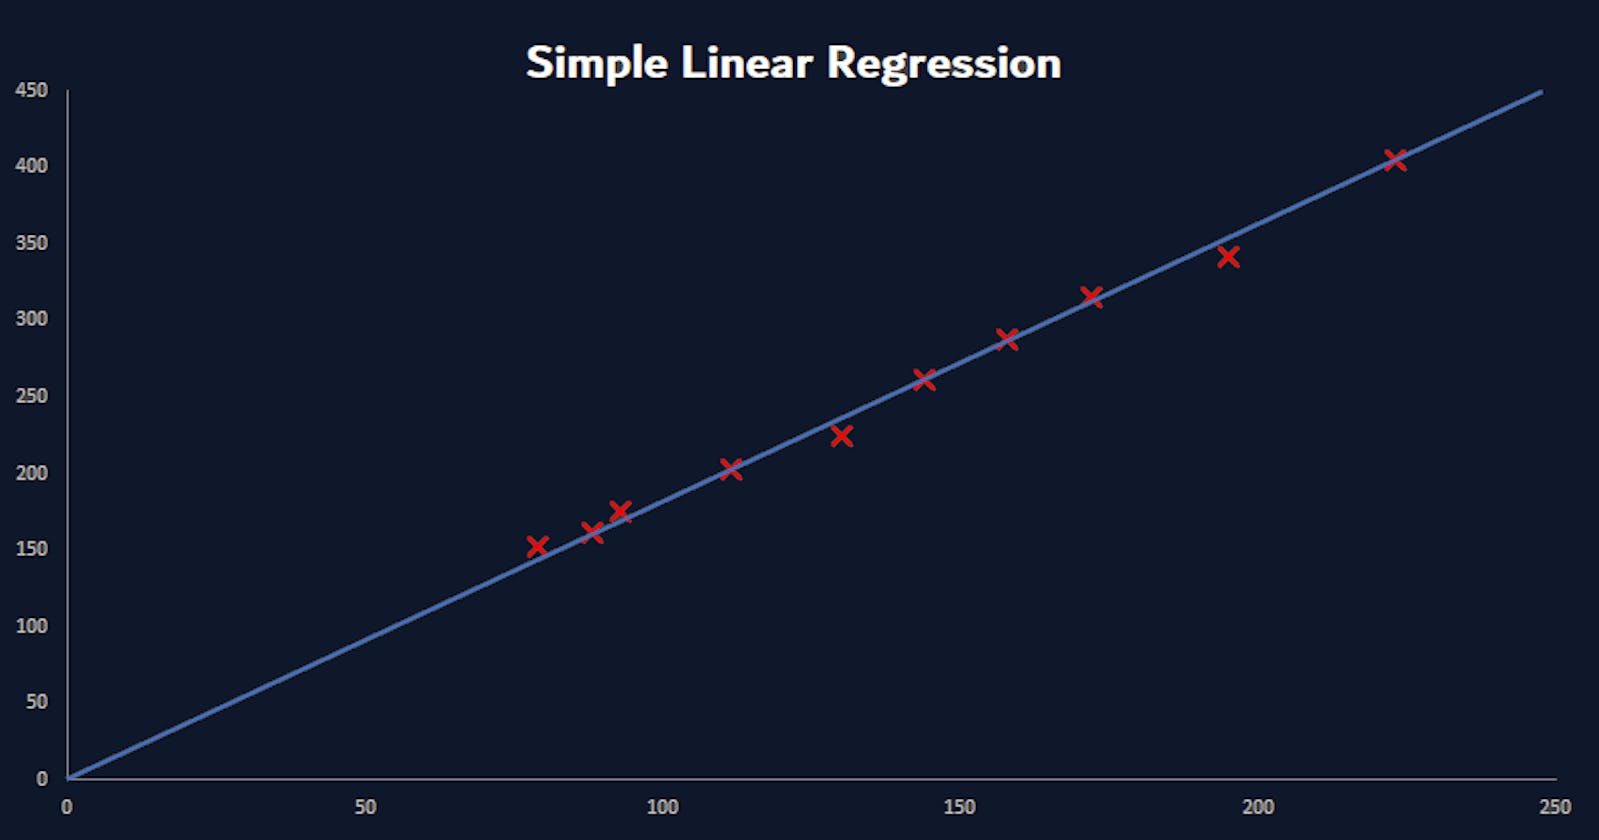 Supervised Learning - Simple Linear Regression